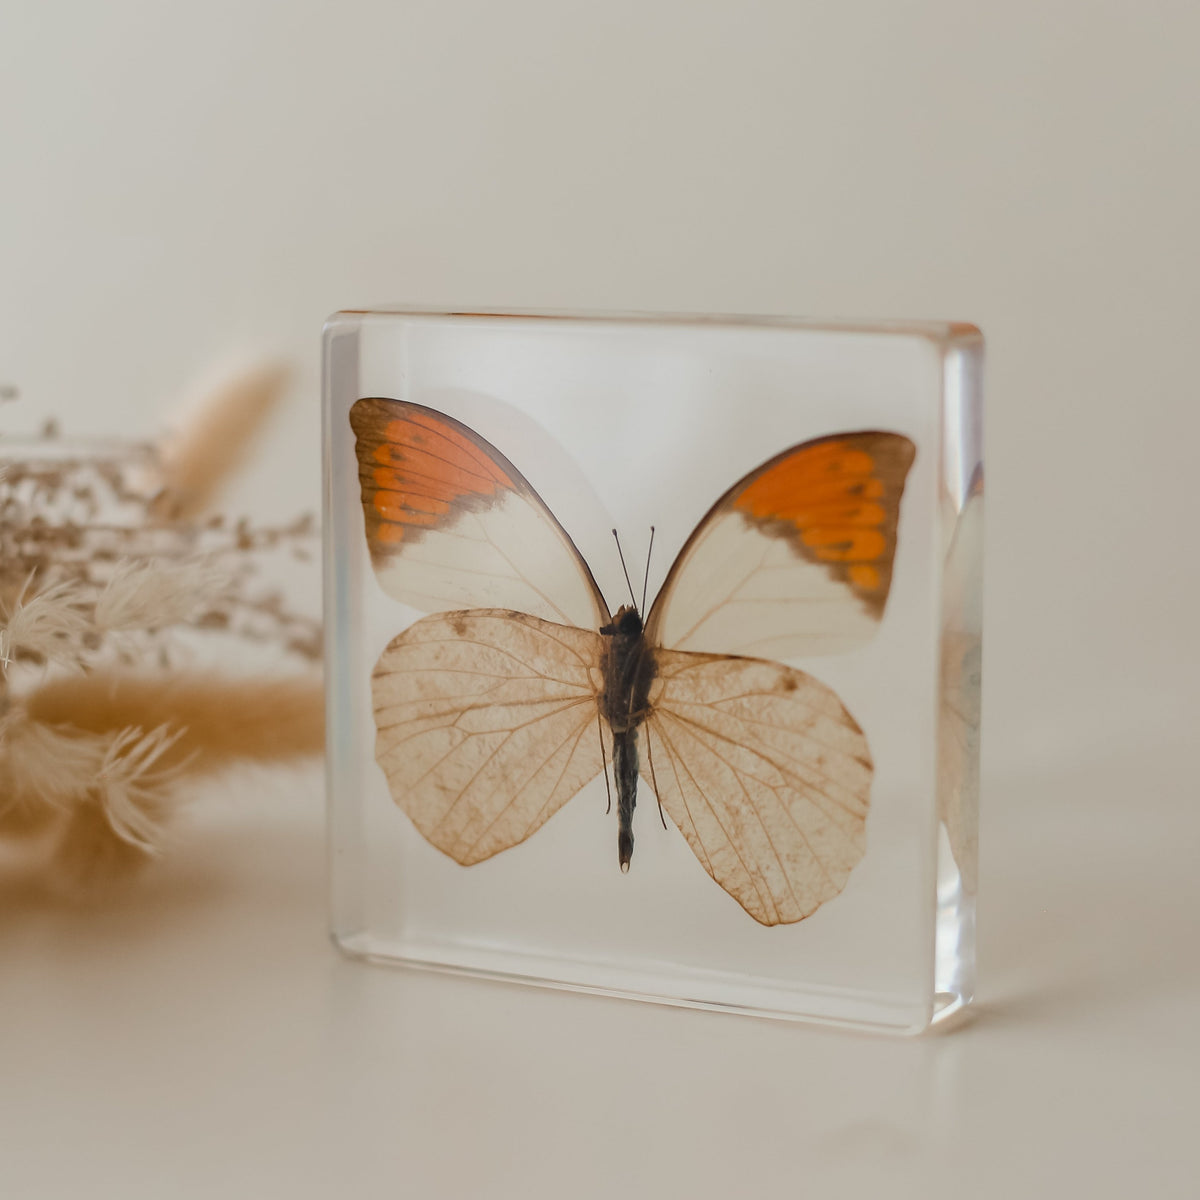 Specimen // Orang-Tipped Butterfly